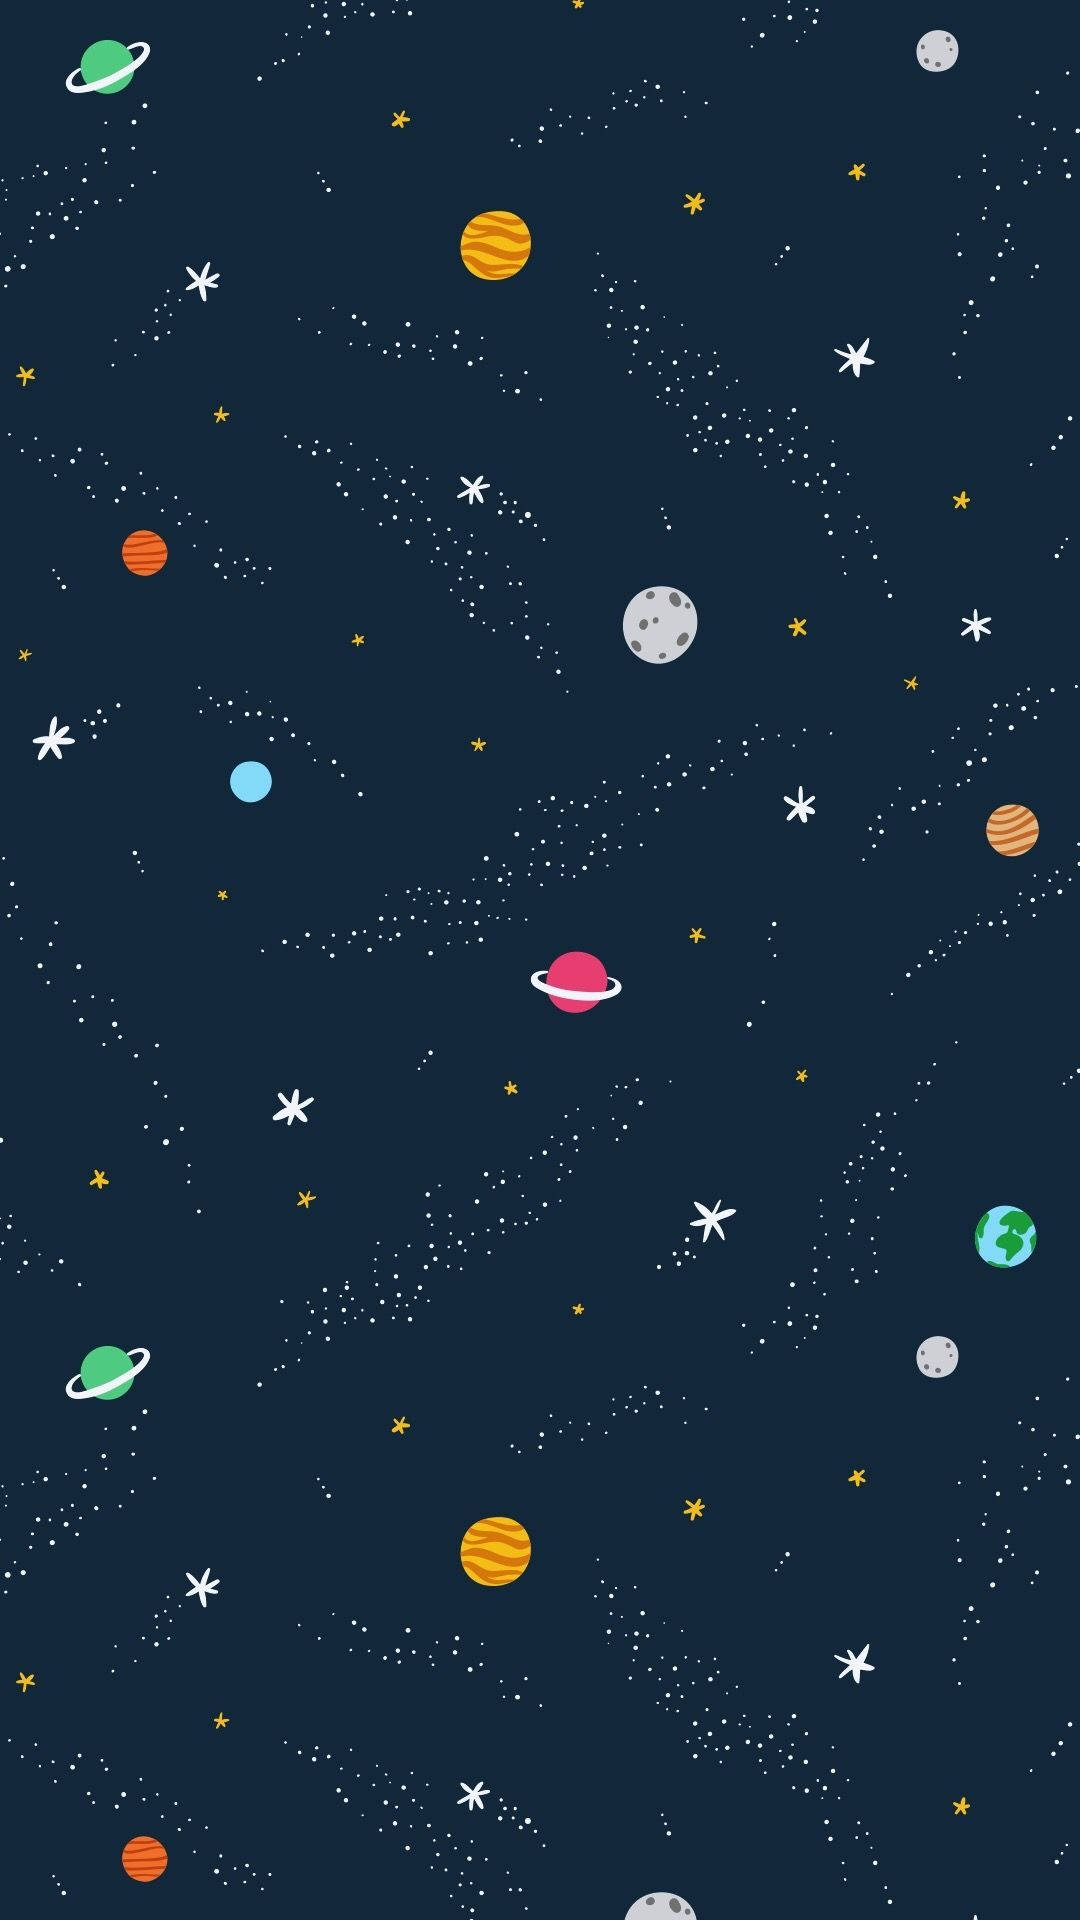 Miniature Planets Galaxy Tumblr Iphone Background